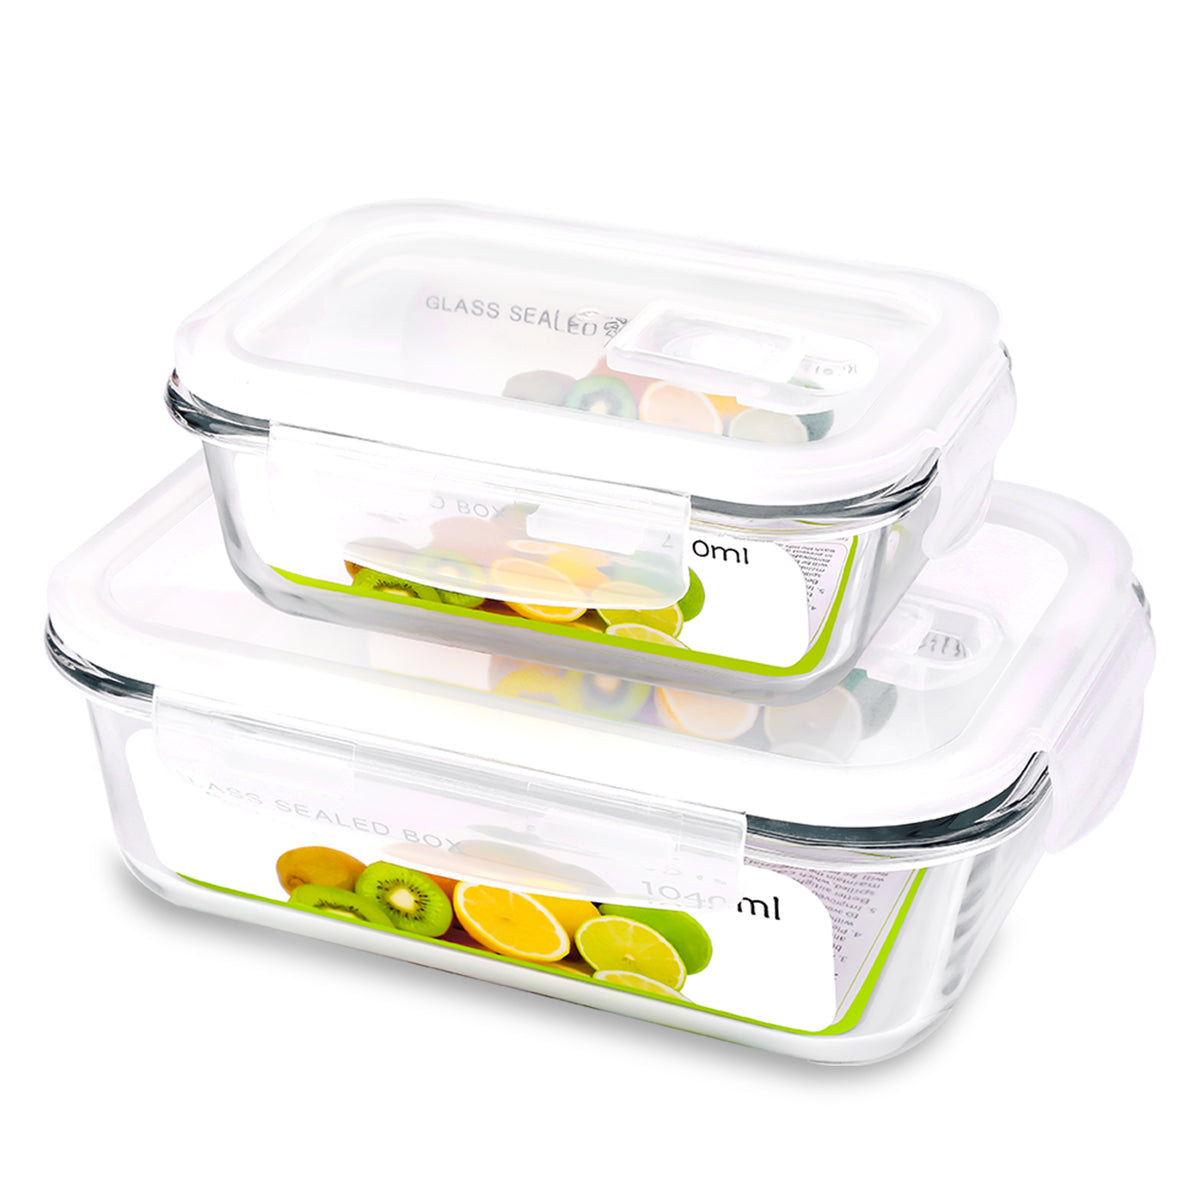 Puzzle Lock Air-Tight Resizable Storage Containers – Set of 2